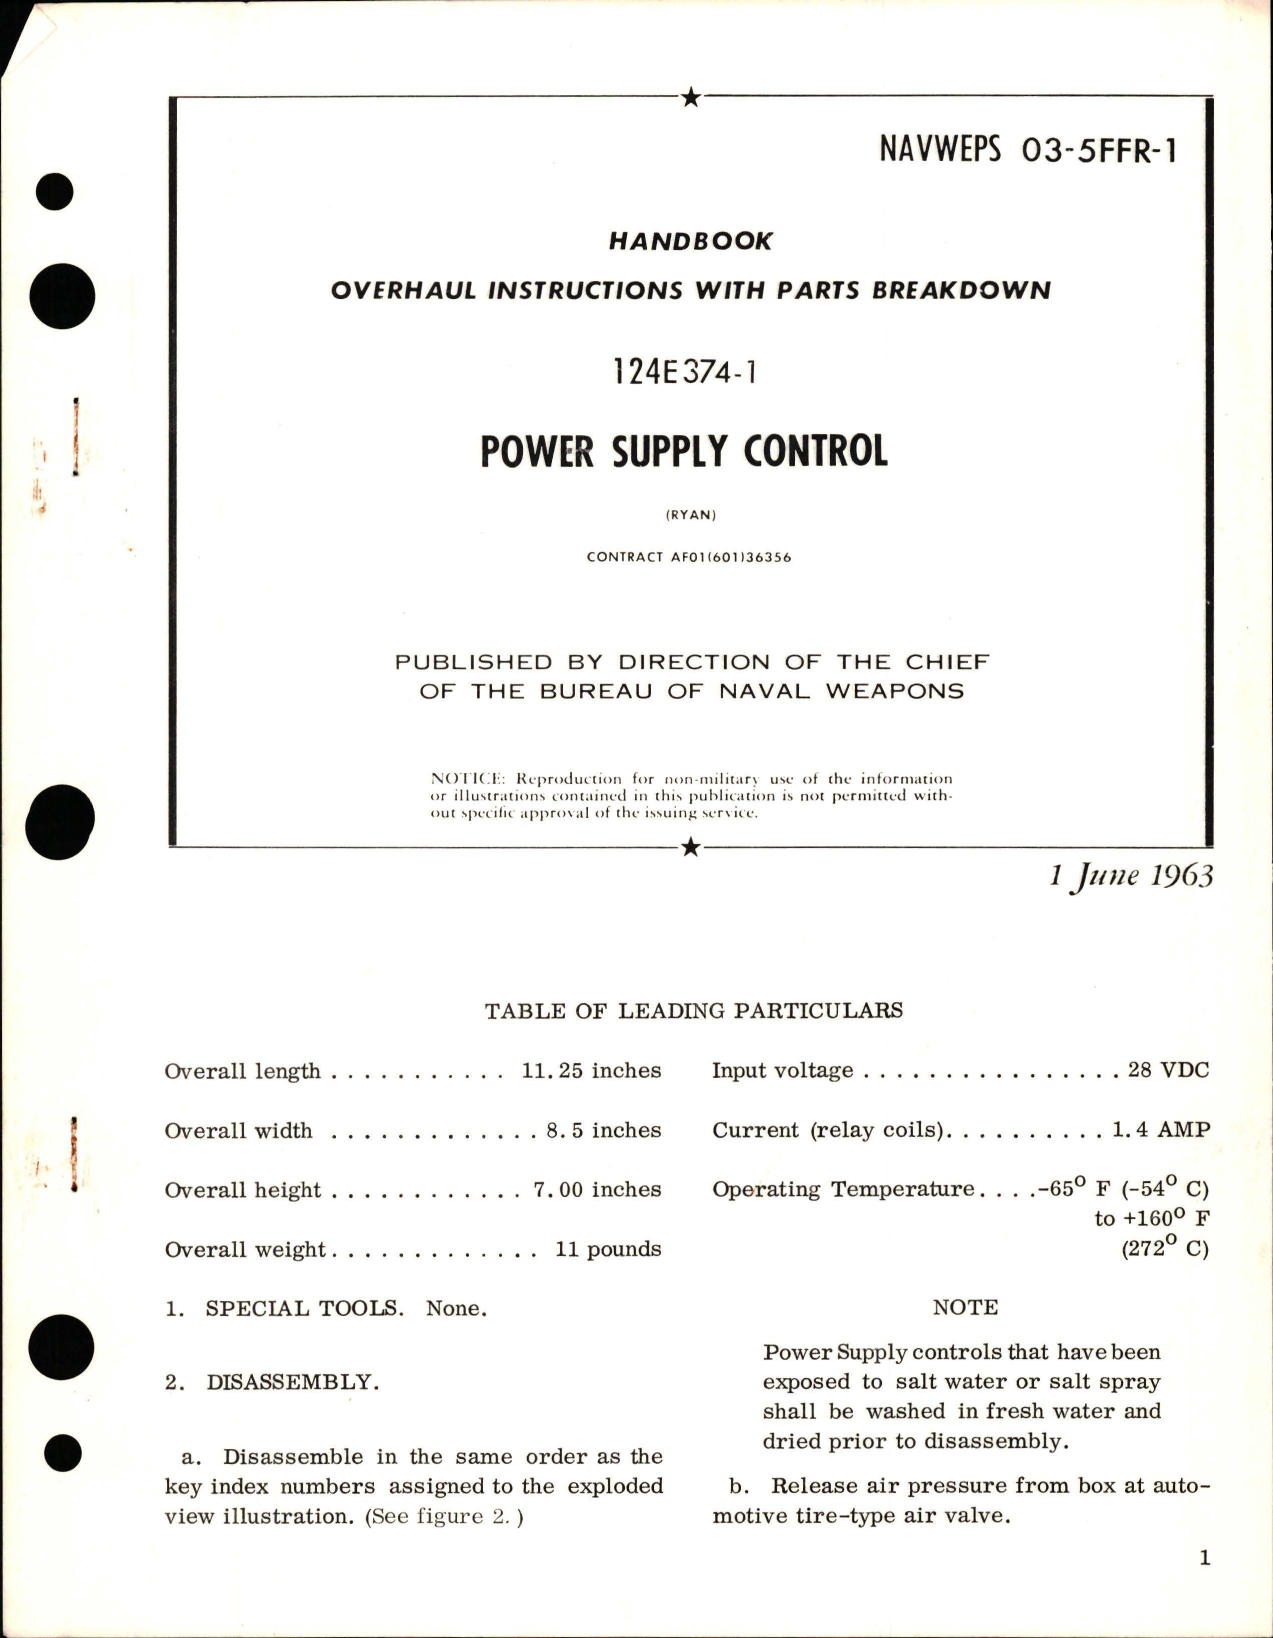 Sample page 1 from AirCorps Library document: Overhaul Instructions with Parts Breakdown for Power Supply Control - 124E374-1 